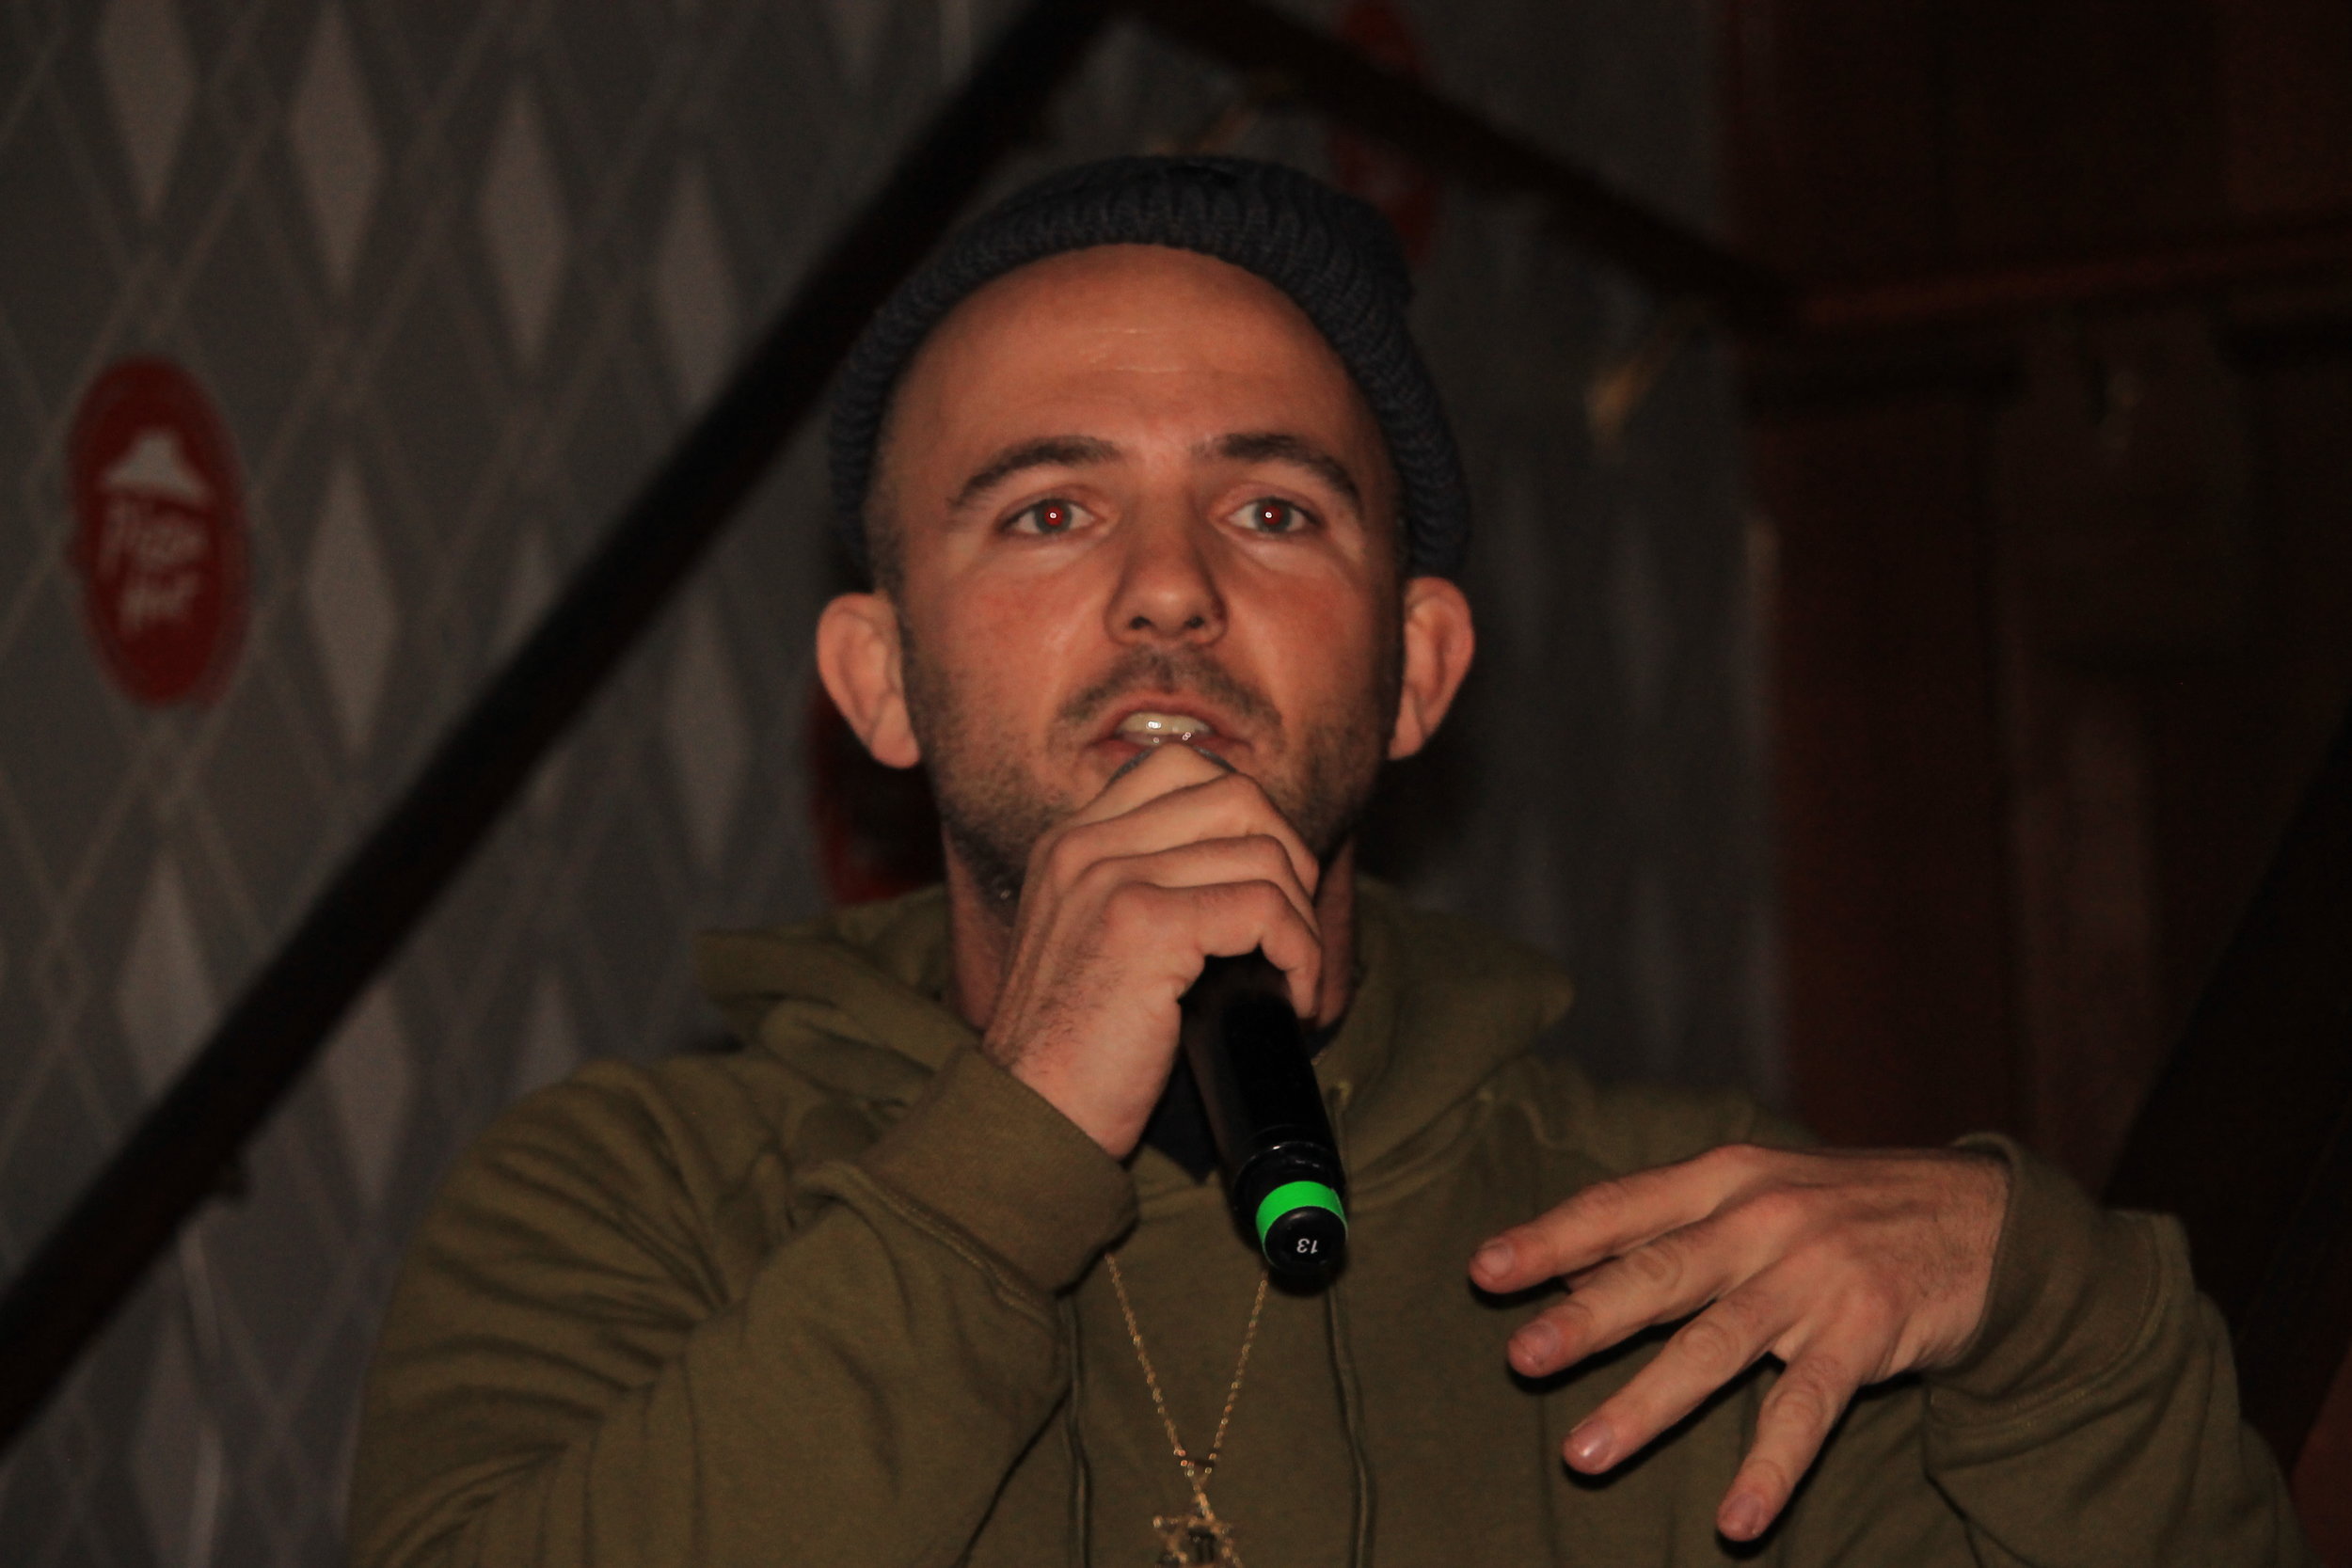  We were honored to have Jewish rapper Kosha Dillz with us for our open mic/karaoke hybrid event! 